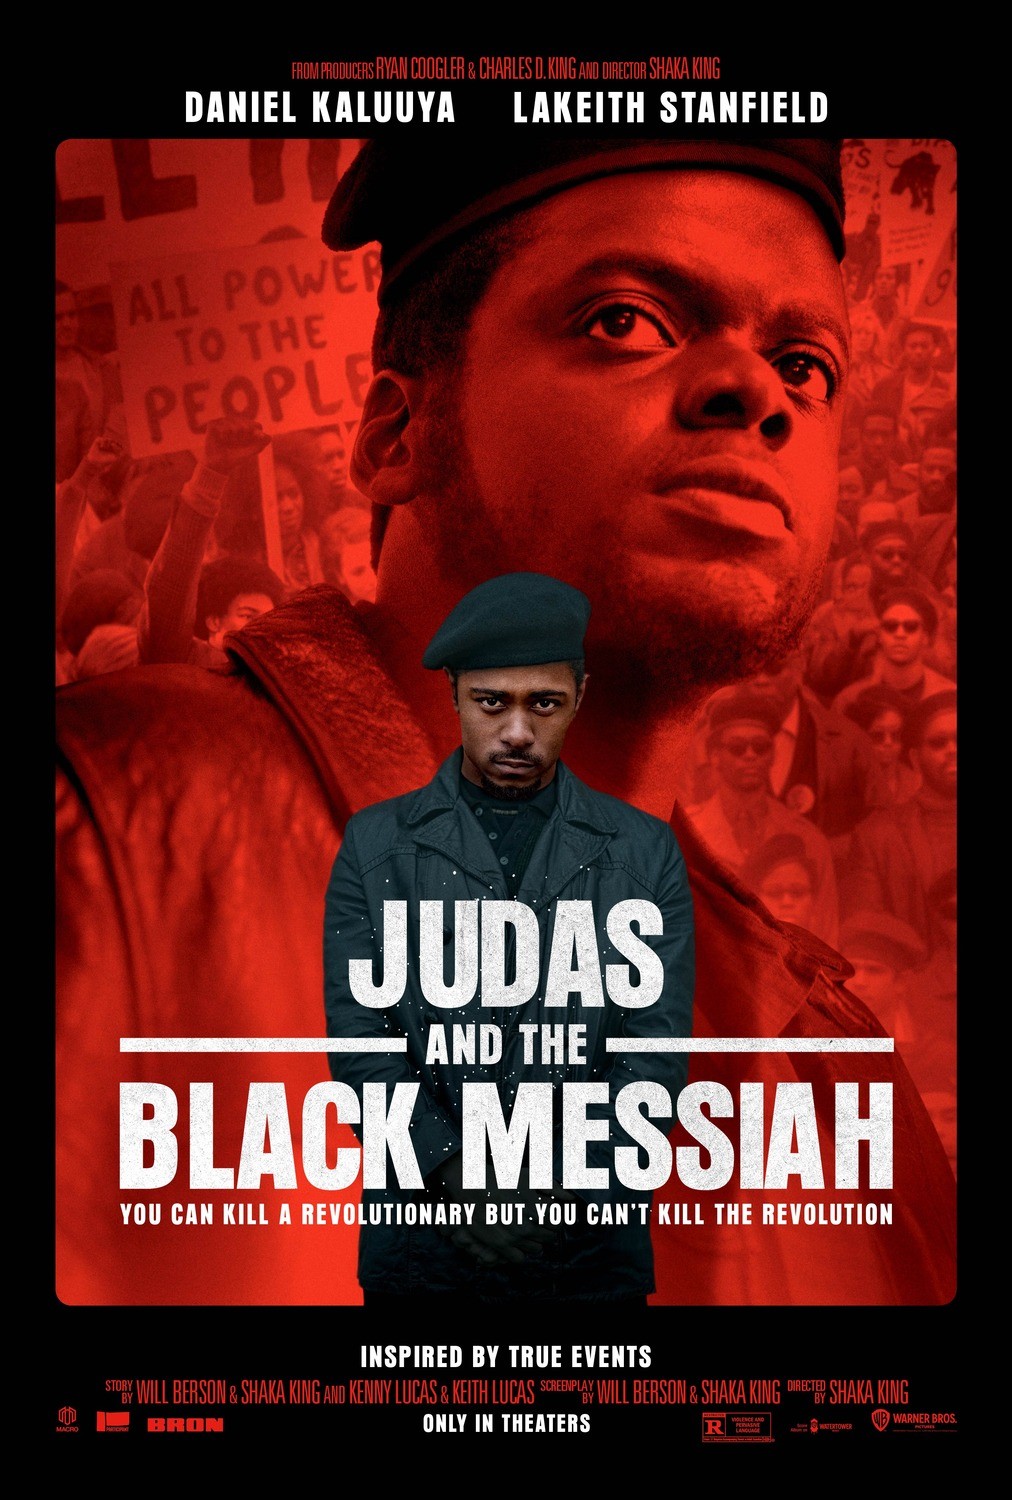 Judas and the Black Messiah 2021: Where to Watch Online for Free!